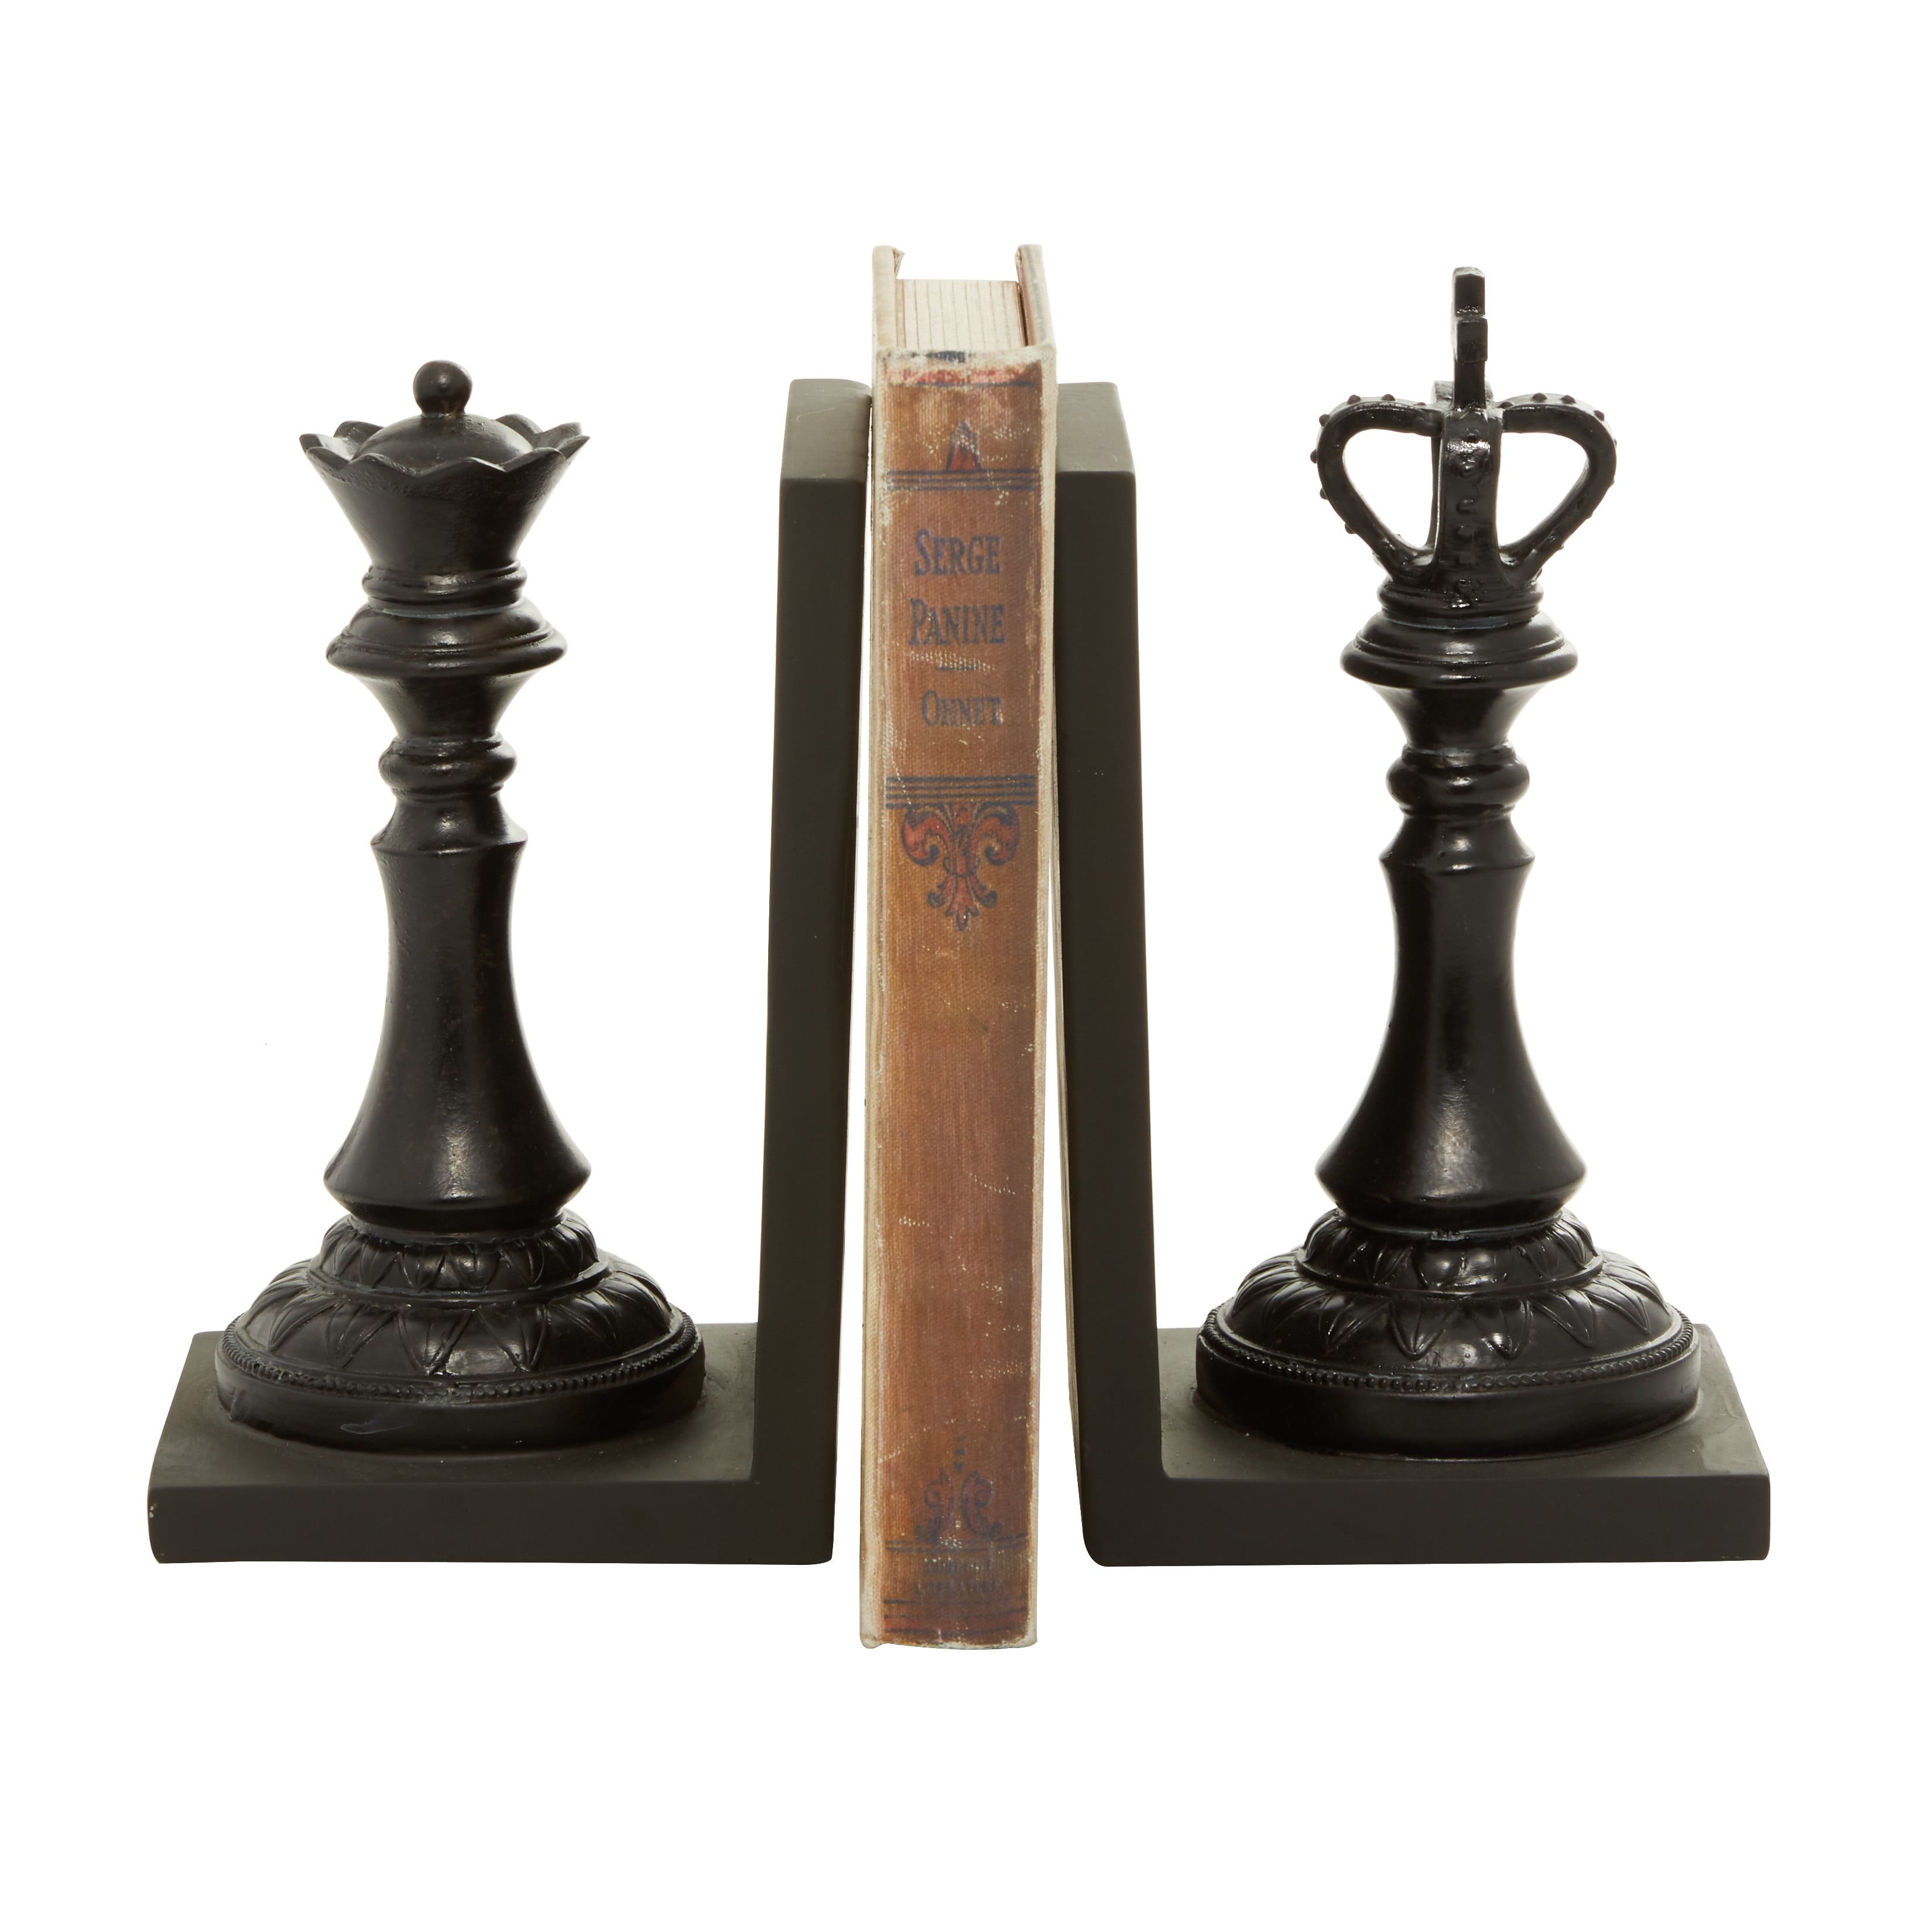 Vintage style distressed finish Pair of Rook Bookends Black Chess Pieces 